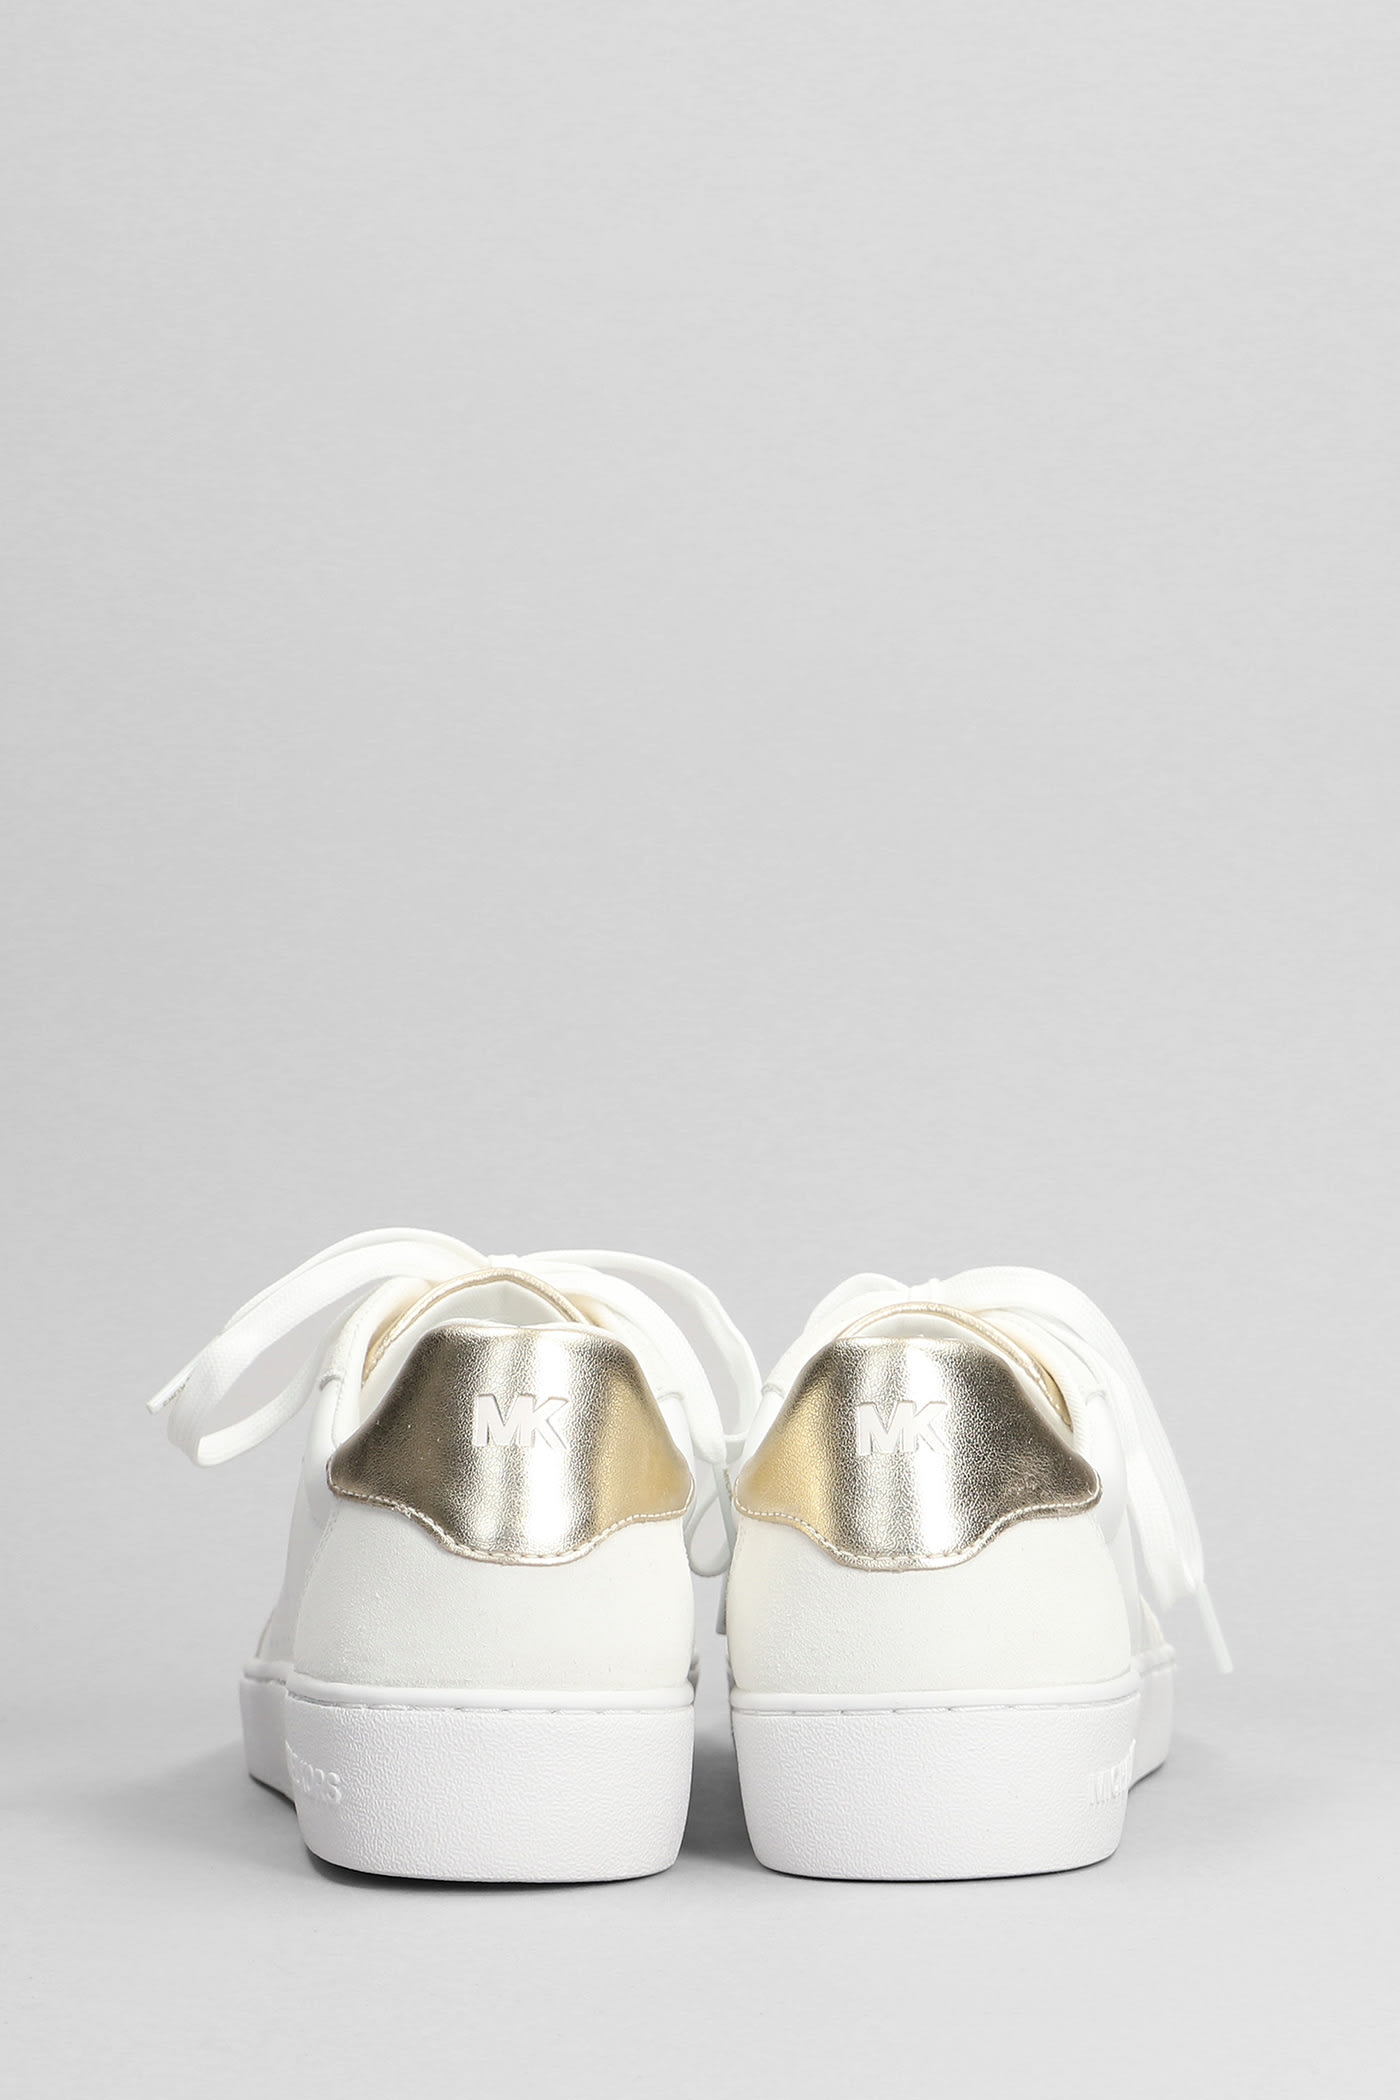 Shop Michael Kors Scotty Sneakers In White Suede And Leather